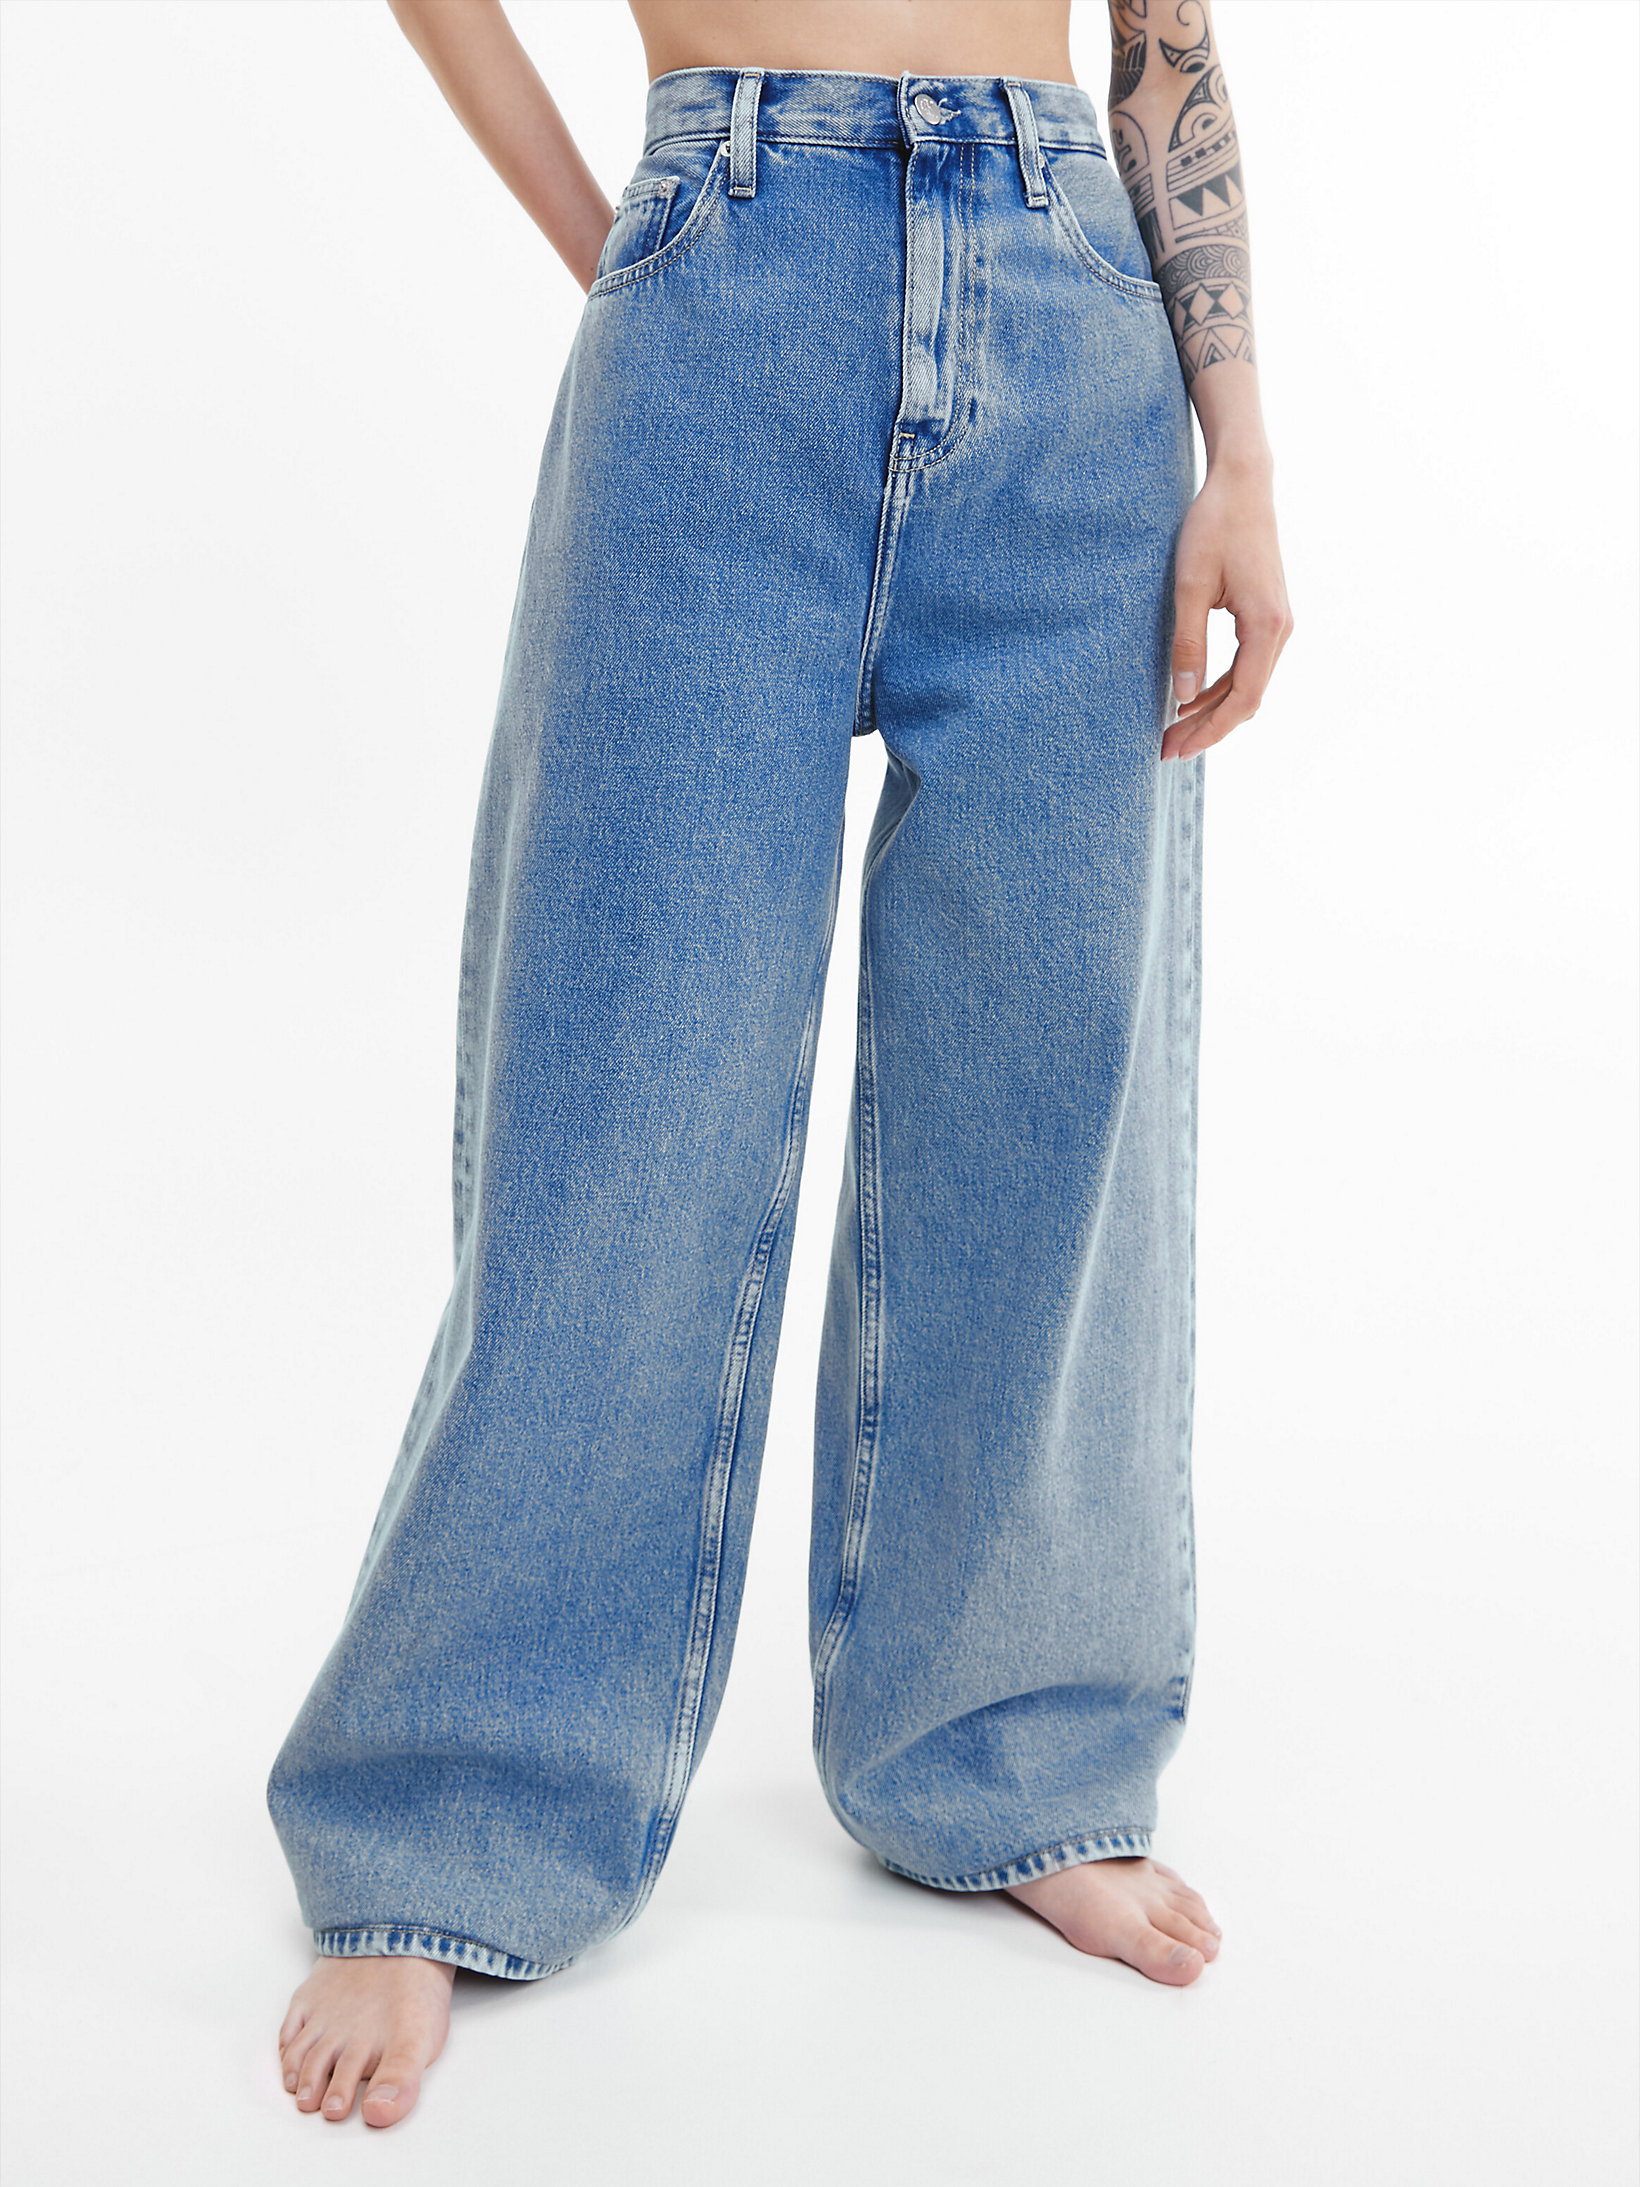 Denim Medium > Jeansy Petite High Rise Relaxed > undefined Kobiety - Calvin Klein